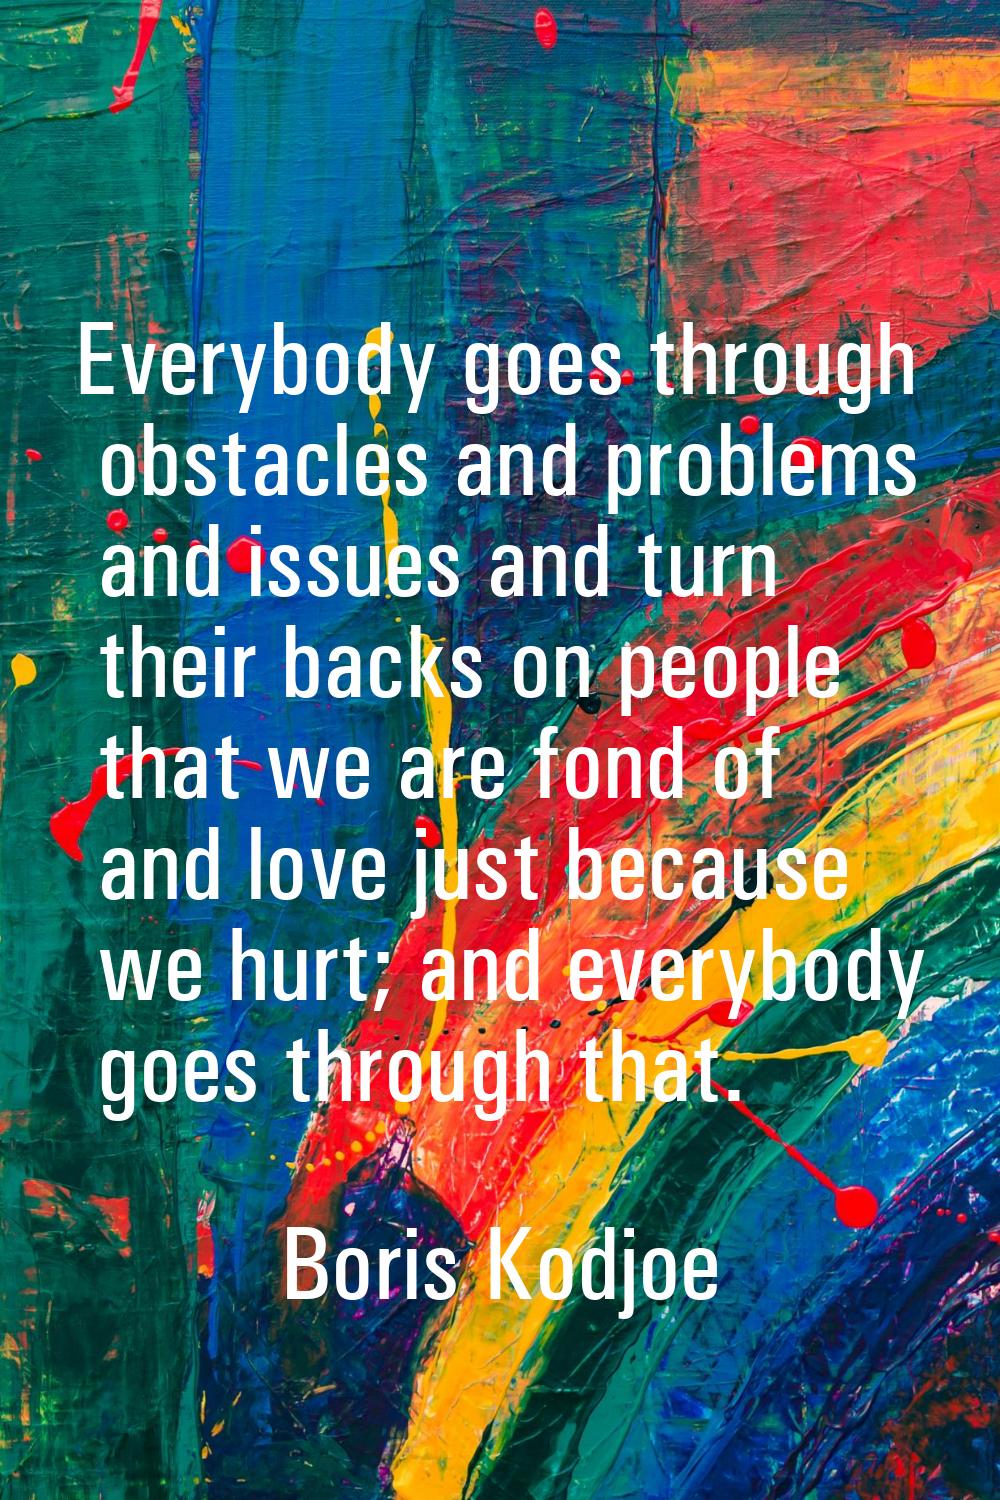 Everybody goes through obstacles and problems and issues and turn their backs on people that we are